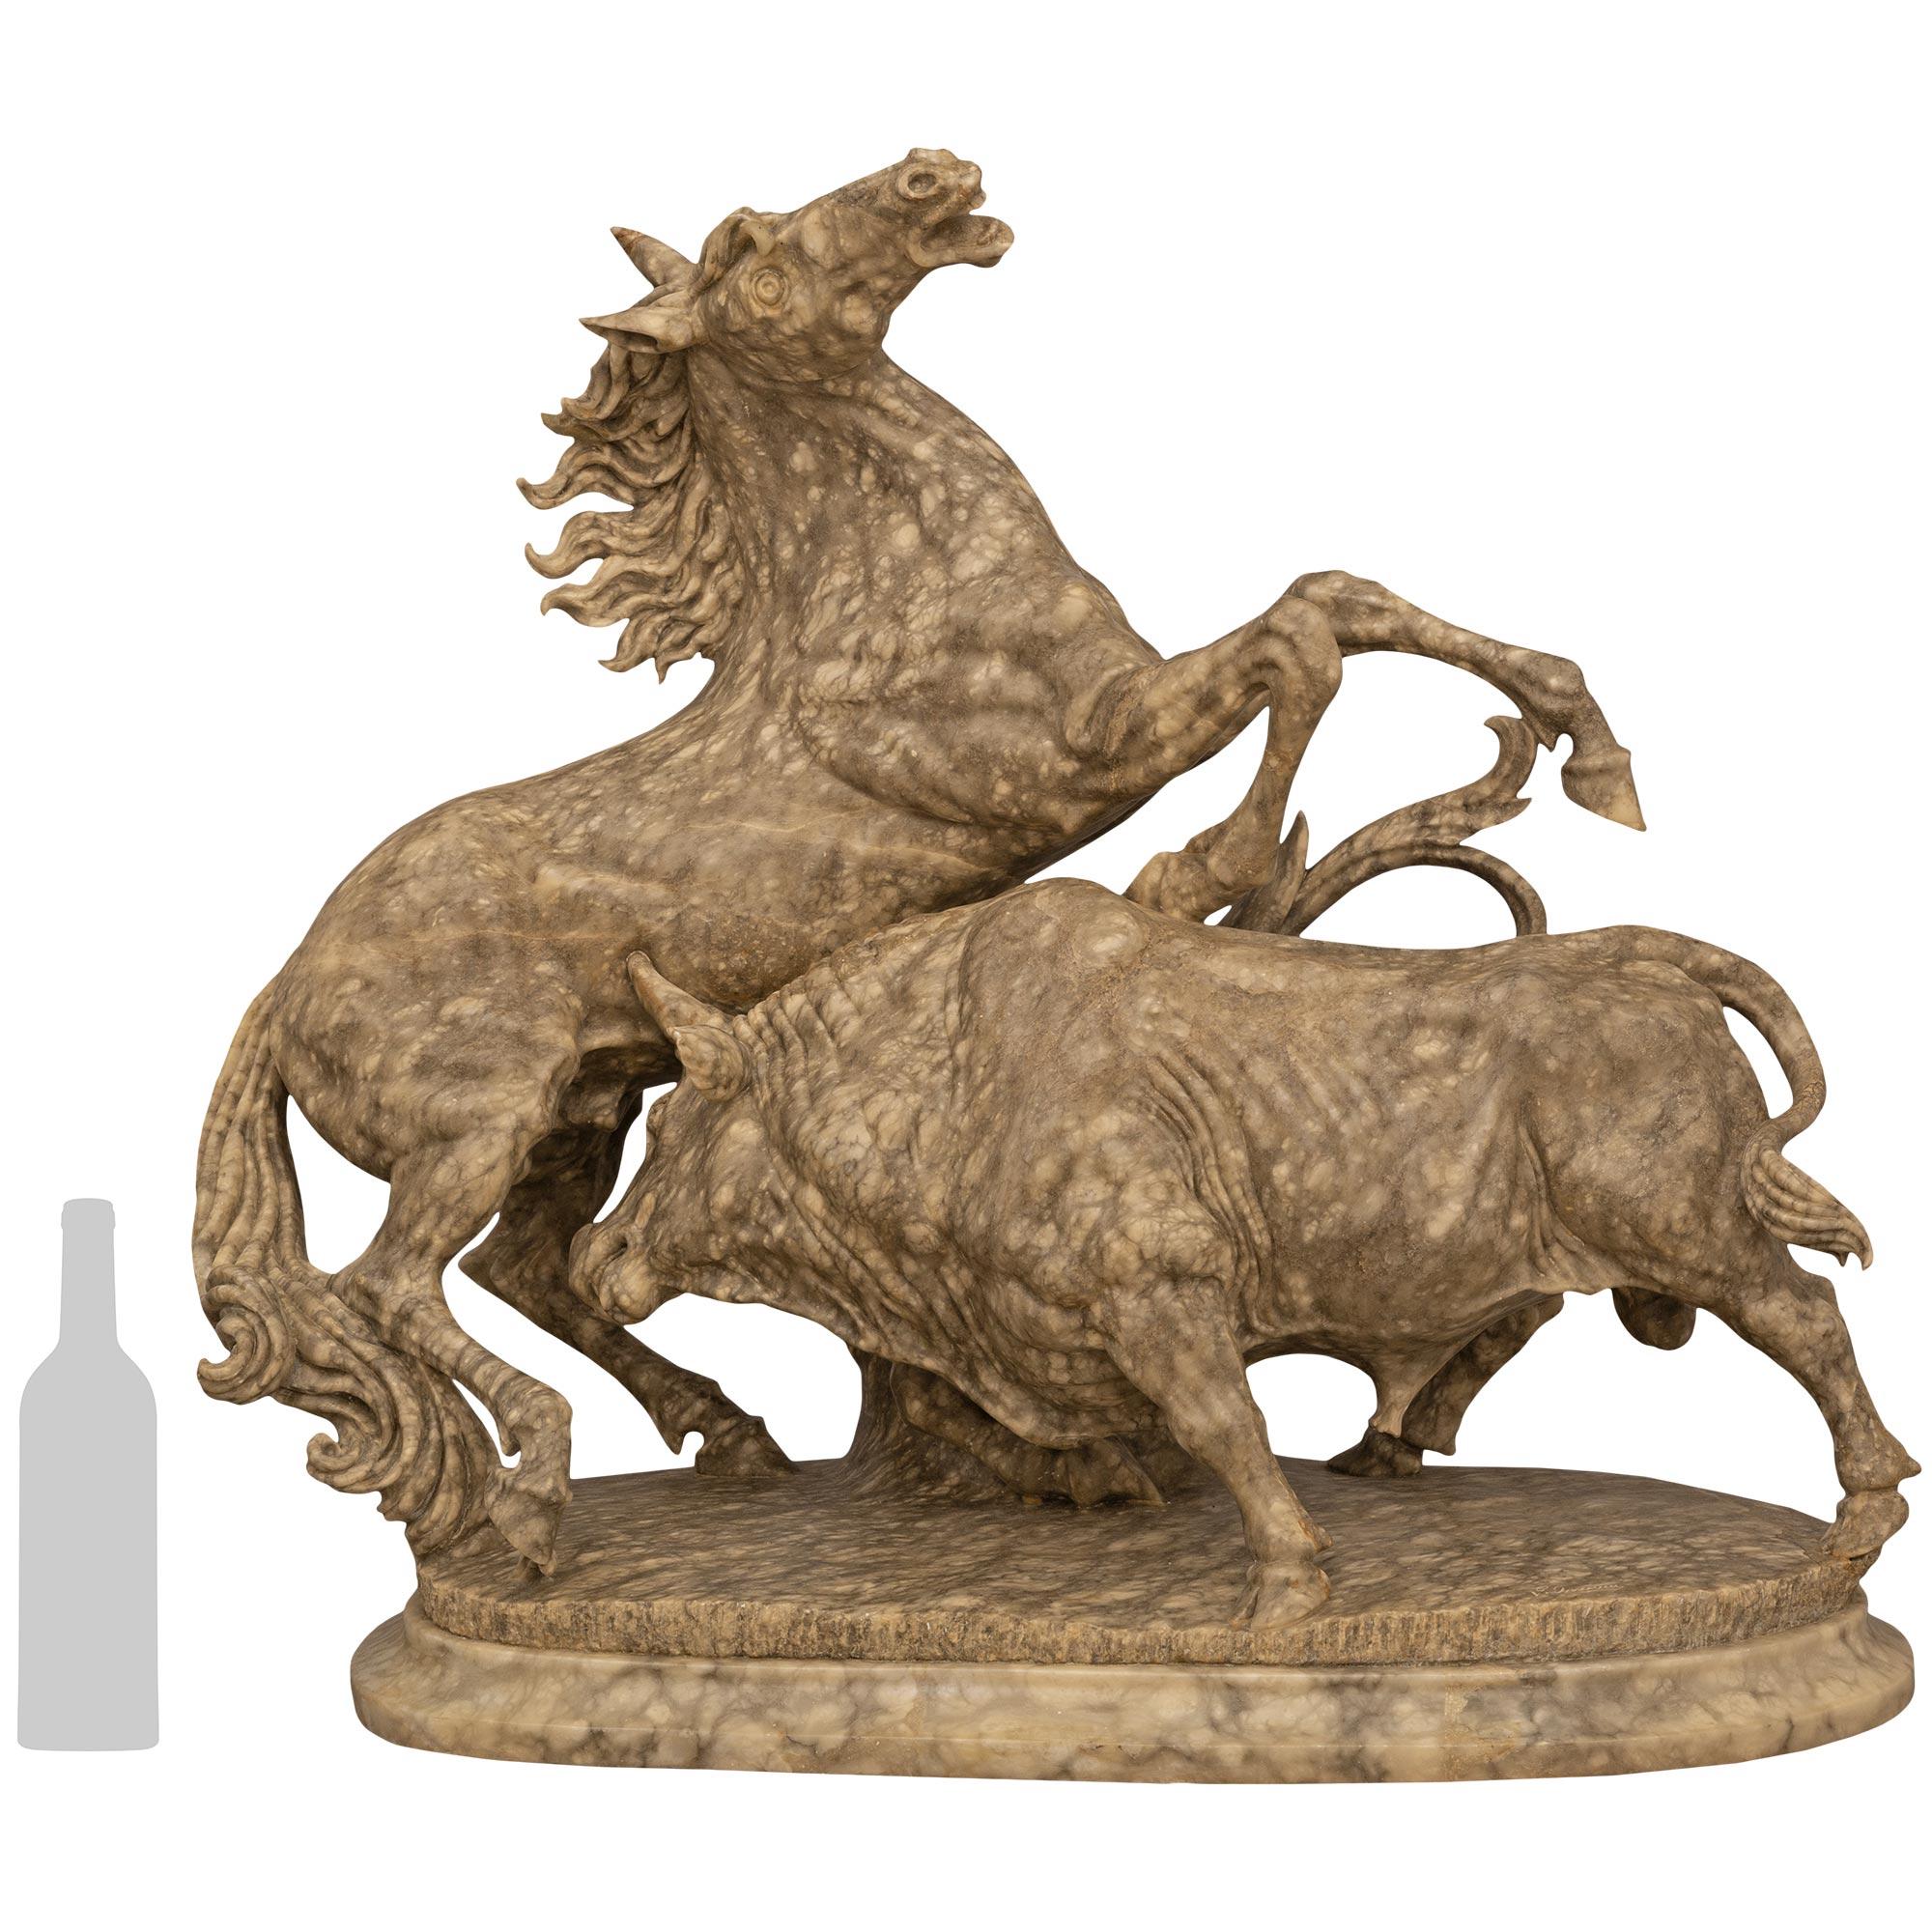 An impressive and intricately detailed Italian 19th century Alabaster statue of a horse and bull in battle. This fierce scene of a horse being gored by a bull displays a powerful and majestic clash between two magnificent beasts. The details of the